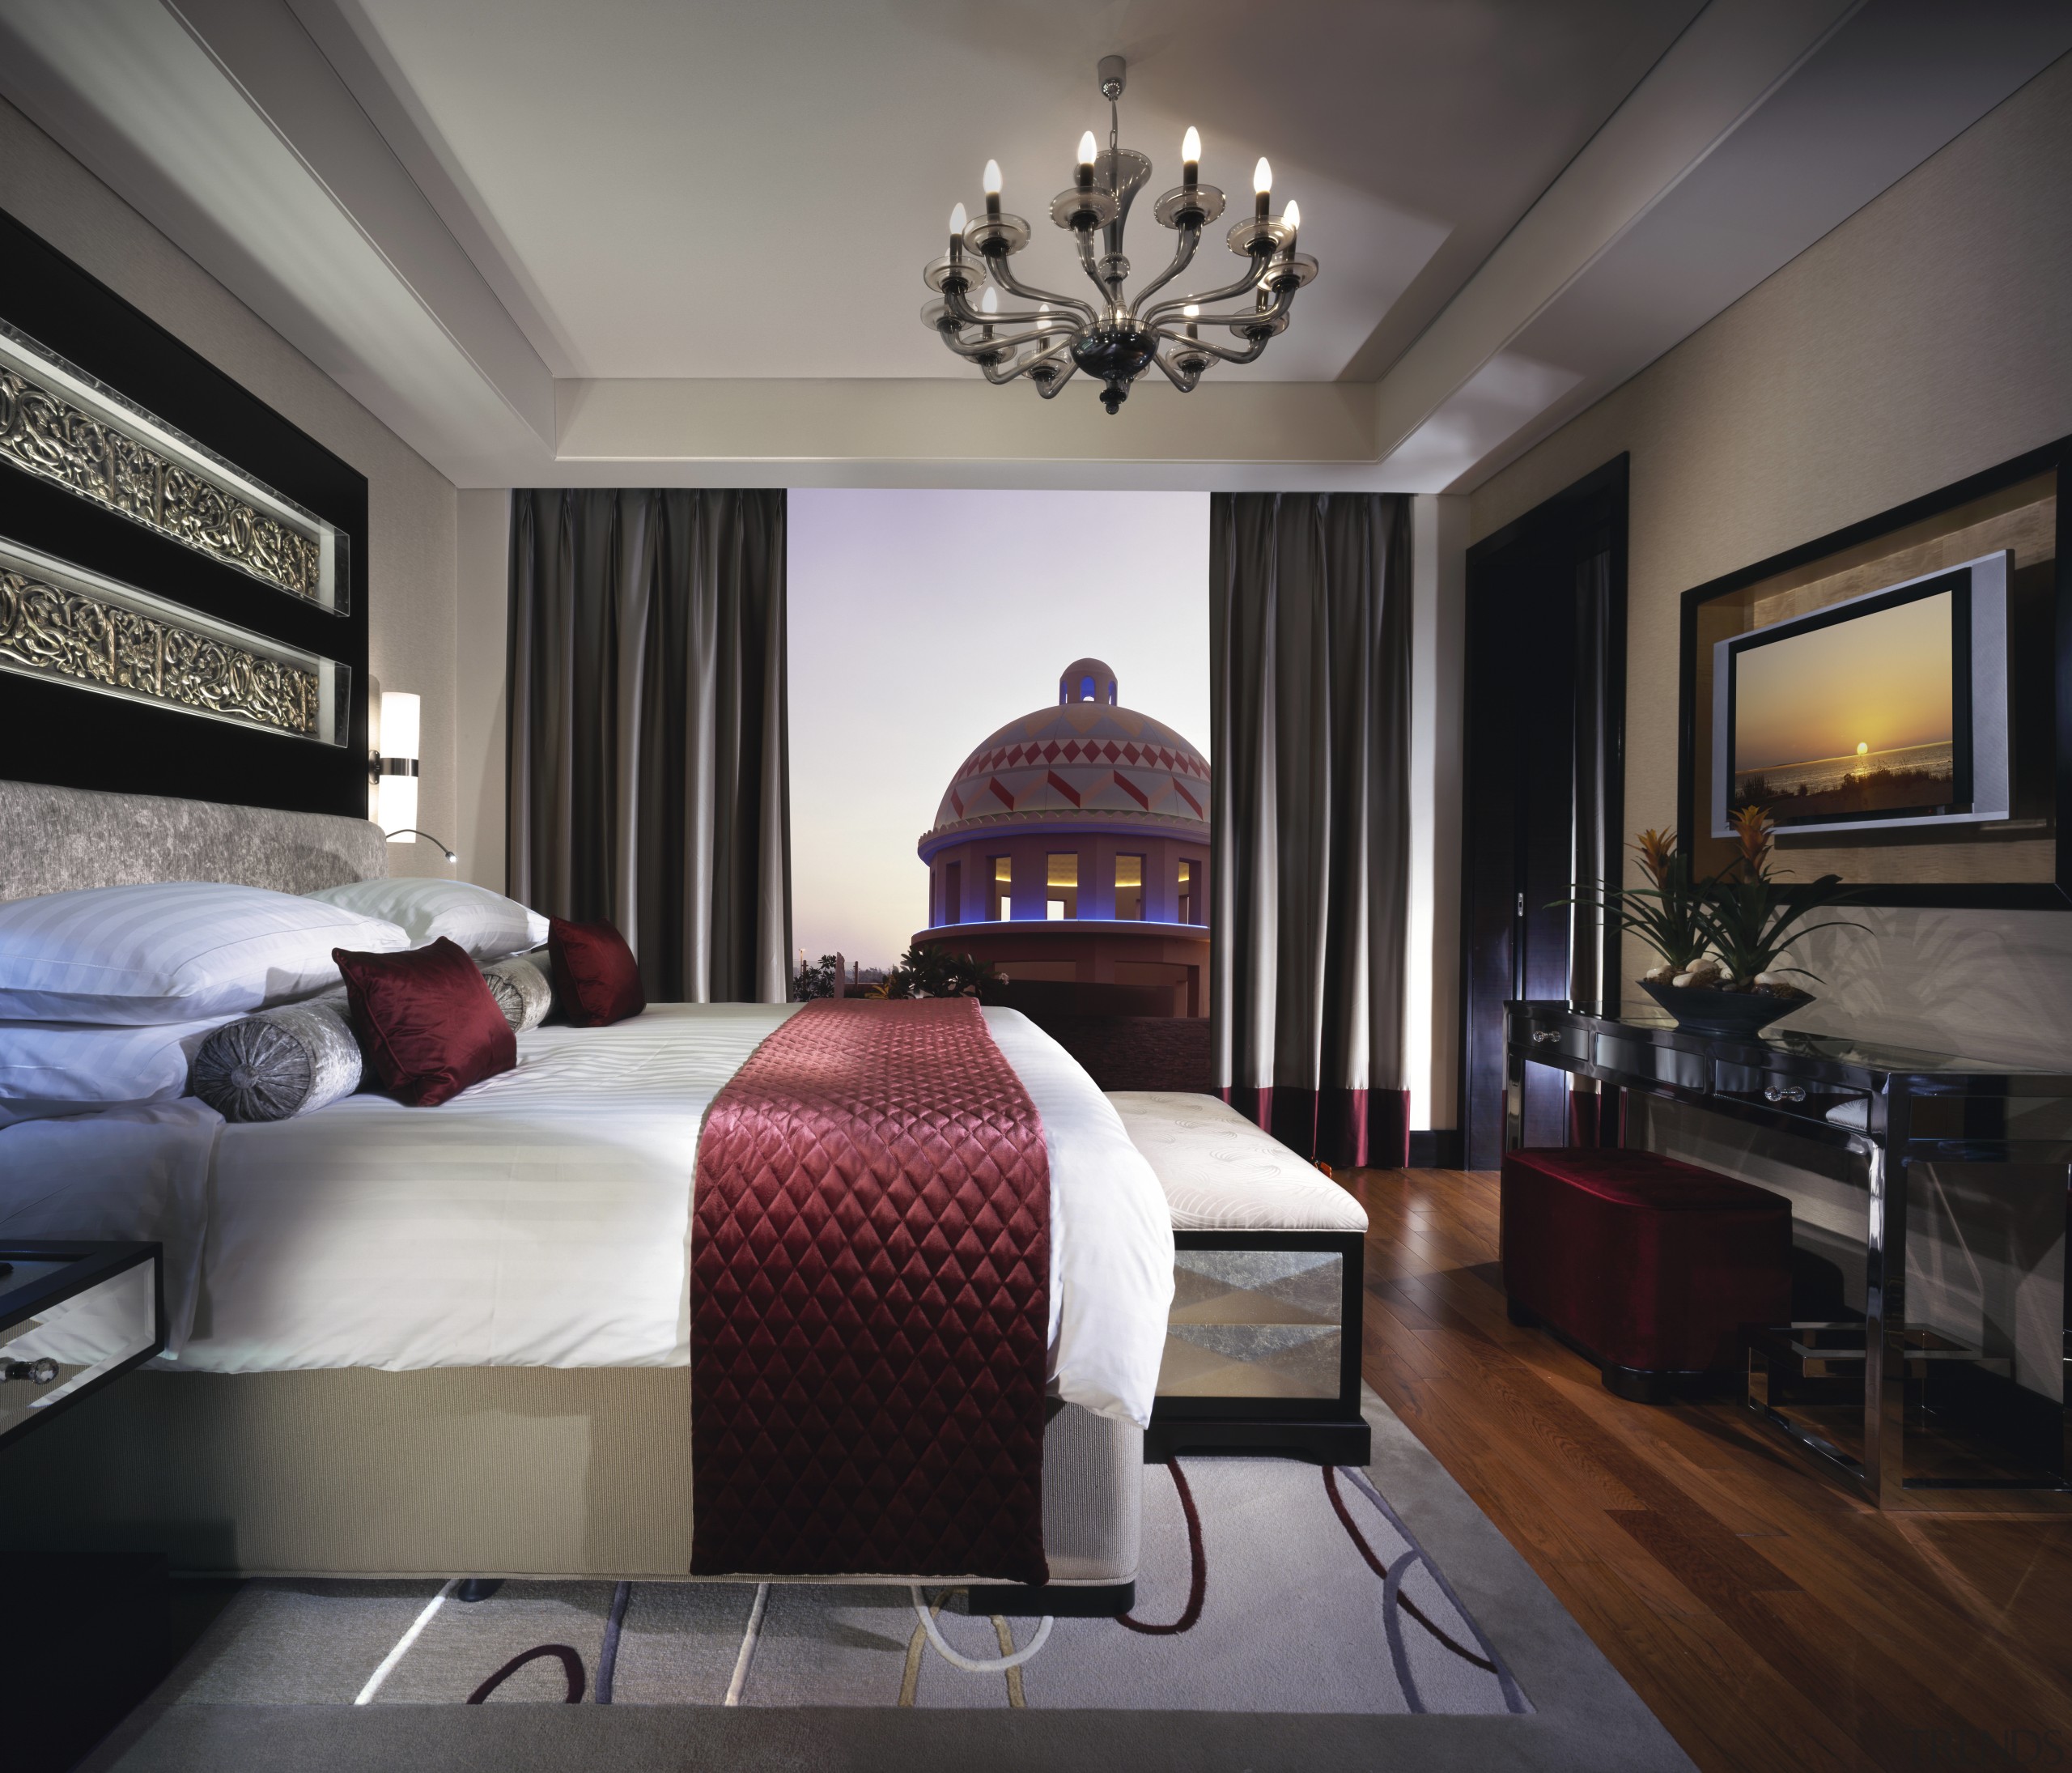 The Hotel Kempinski Dubai features 393 deluxe rooms bed frame, bedroom, ceiling, furniture, home, interior design, living room, room, suite, wall, black, gray